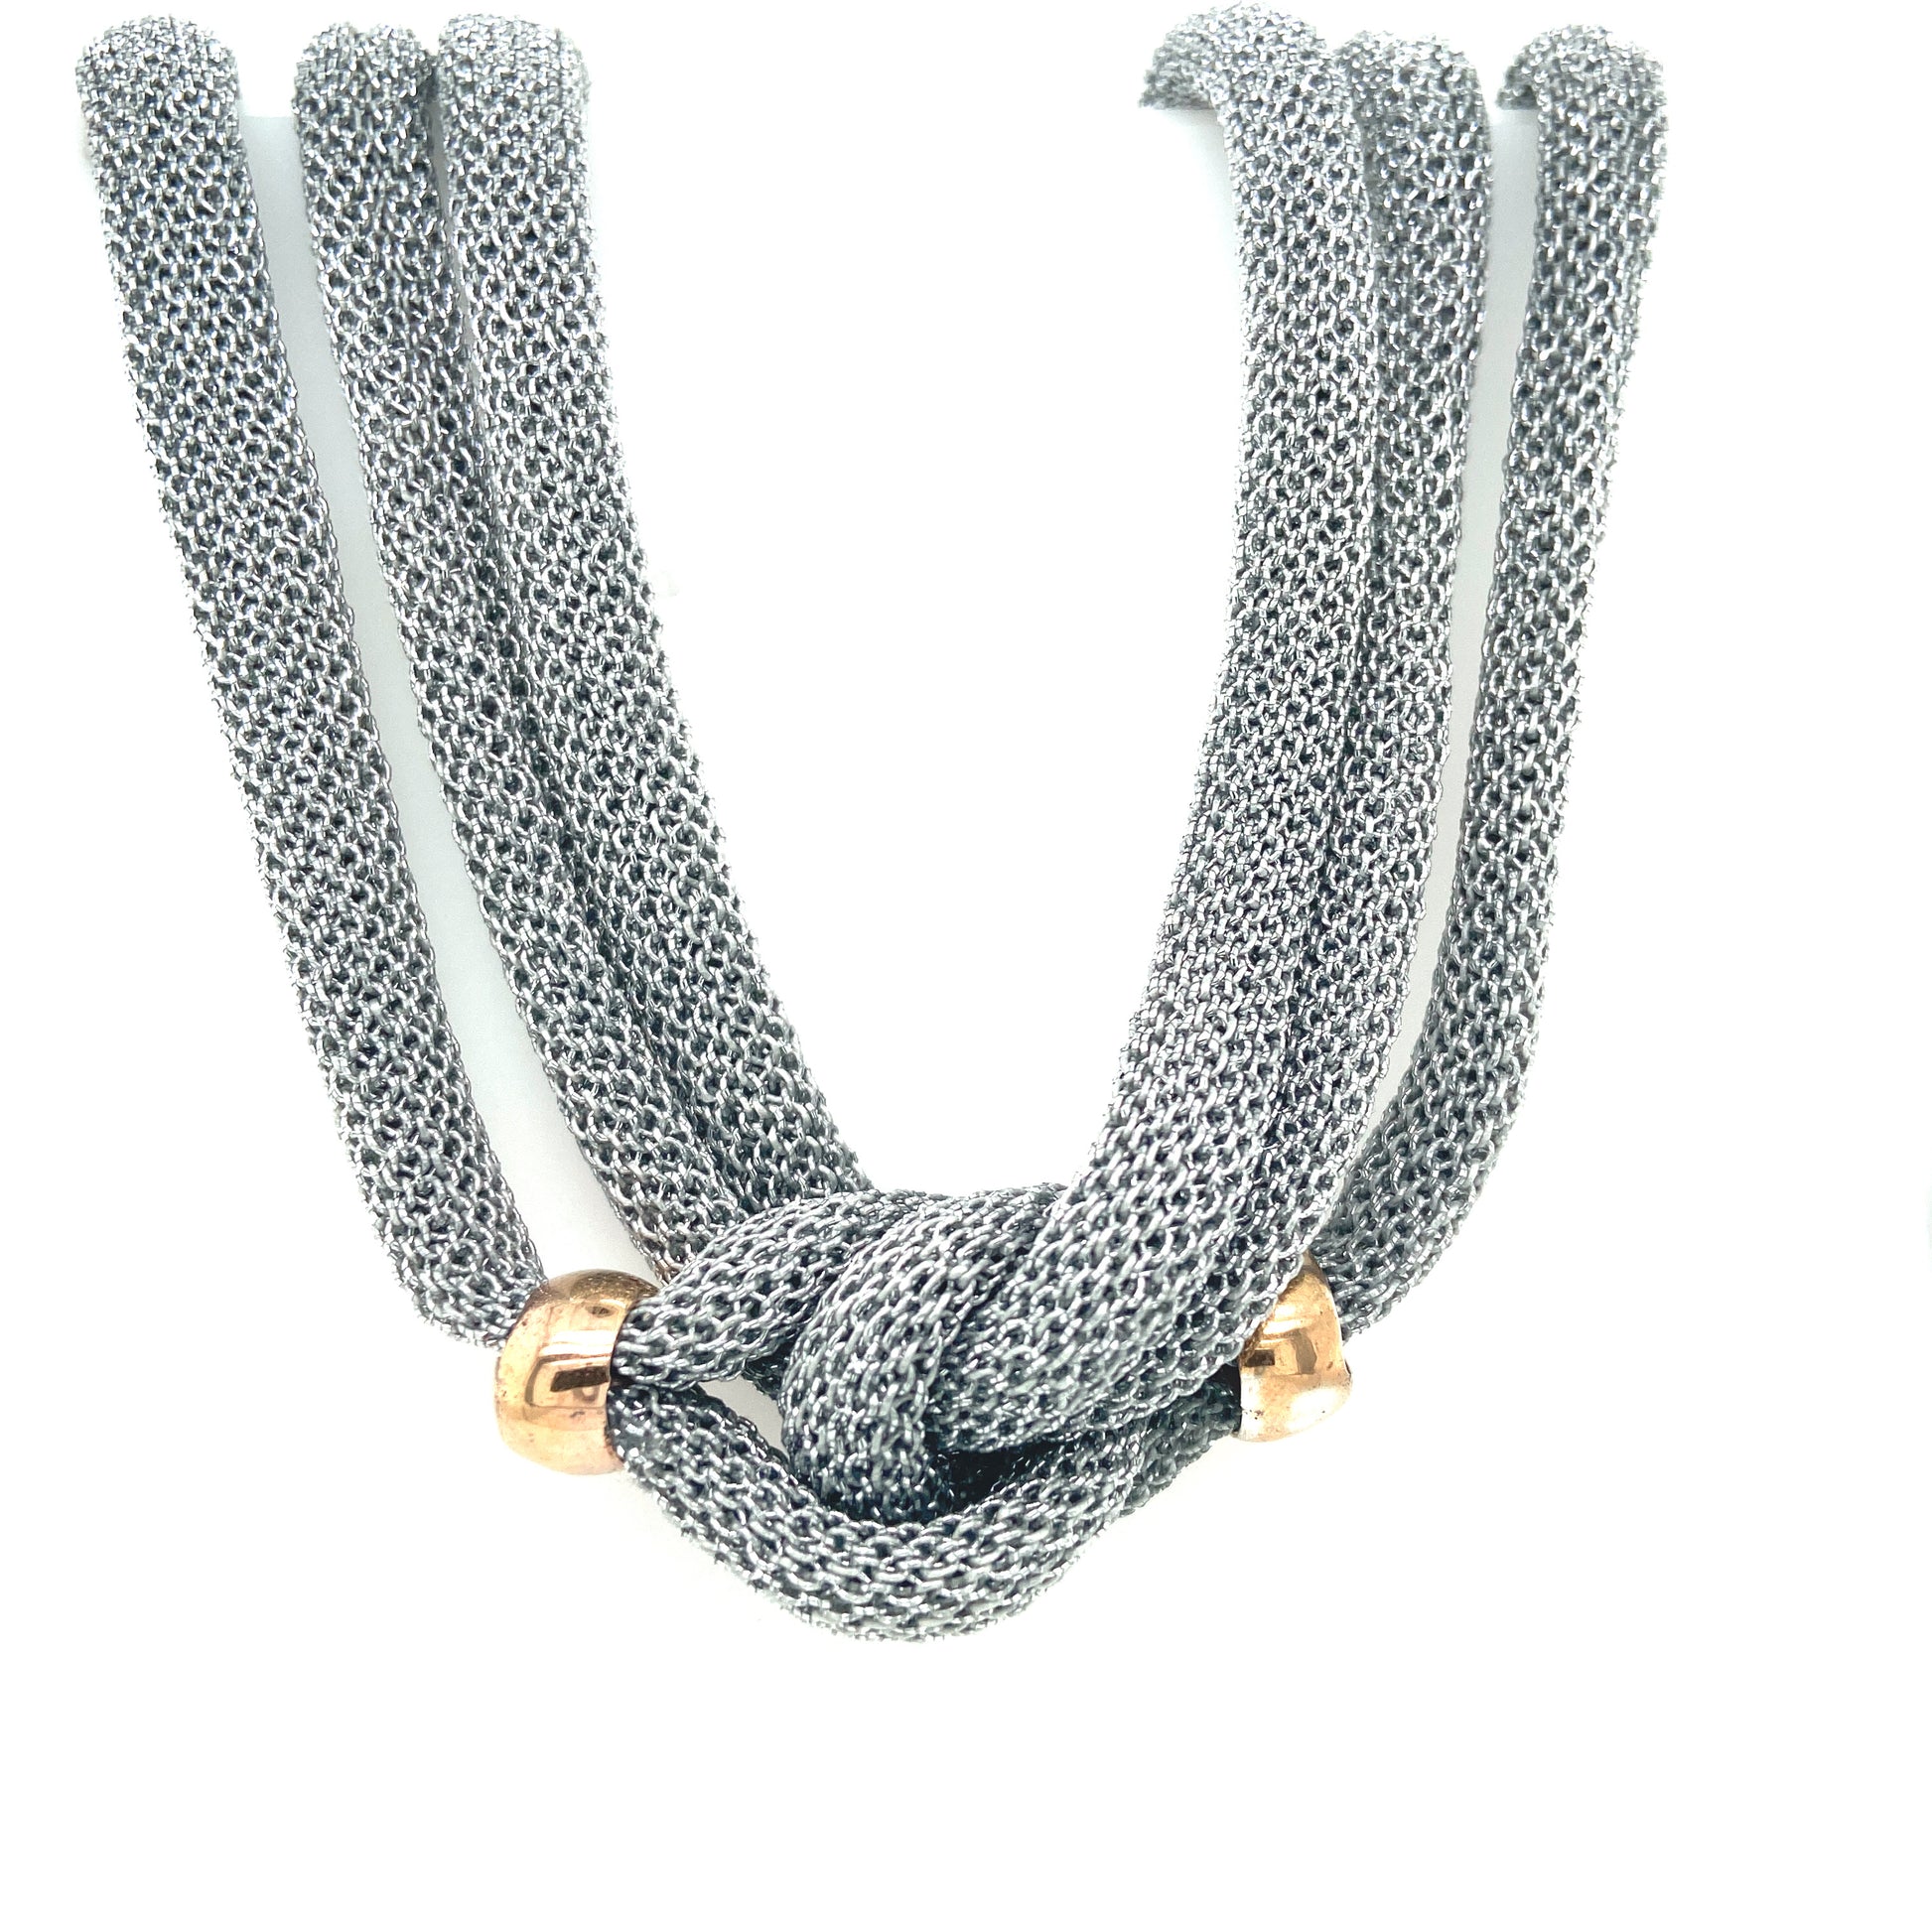 Silver Mesh Necklace with Rose Gold Details | Adami & Martucci | Luby 